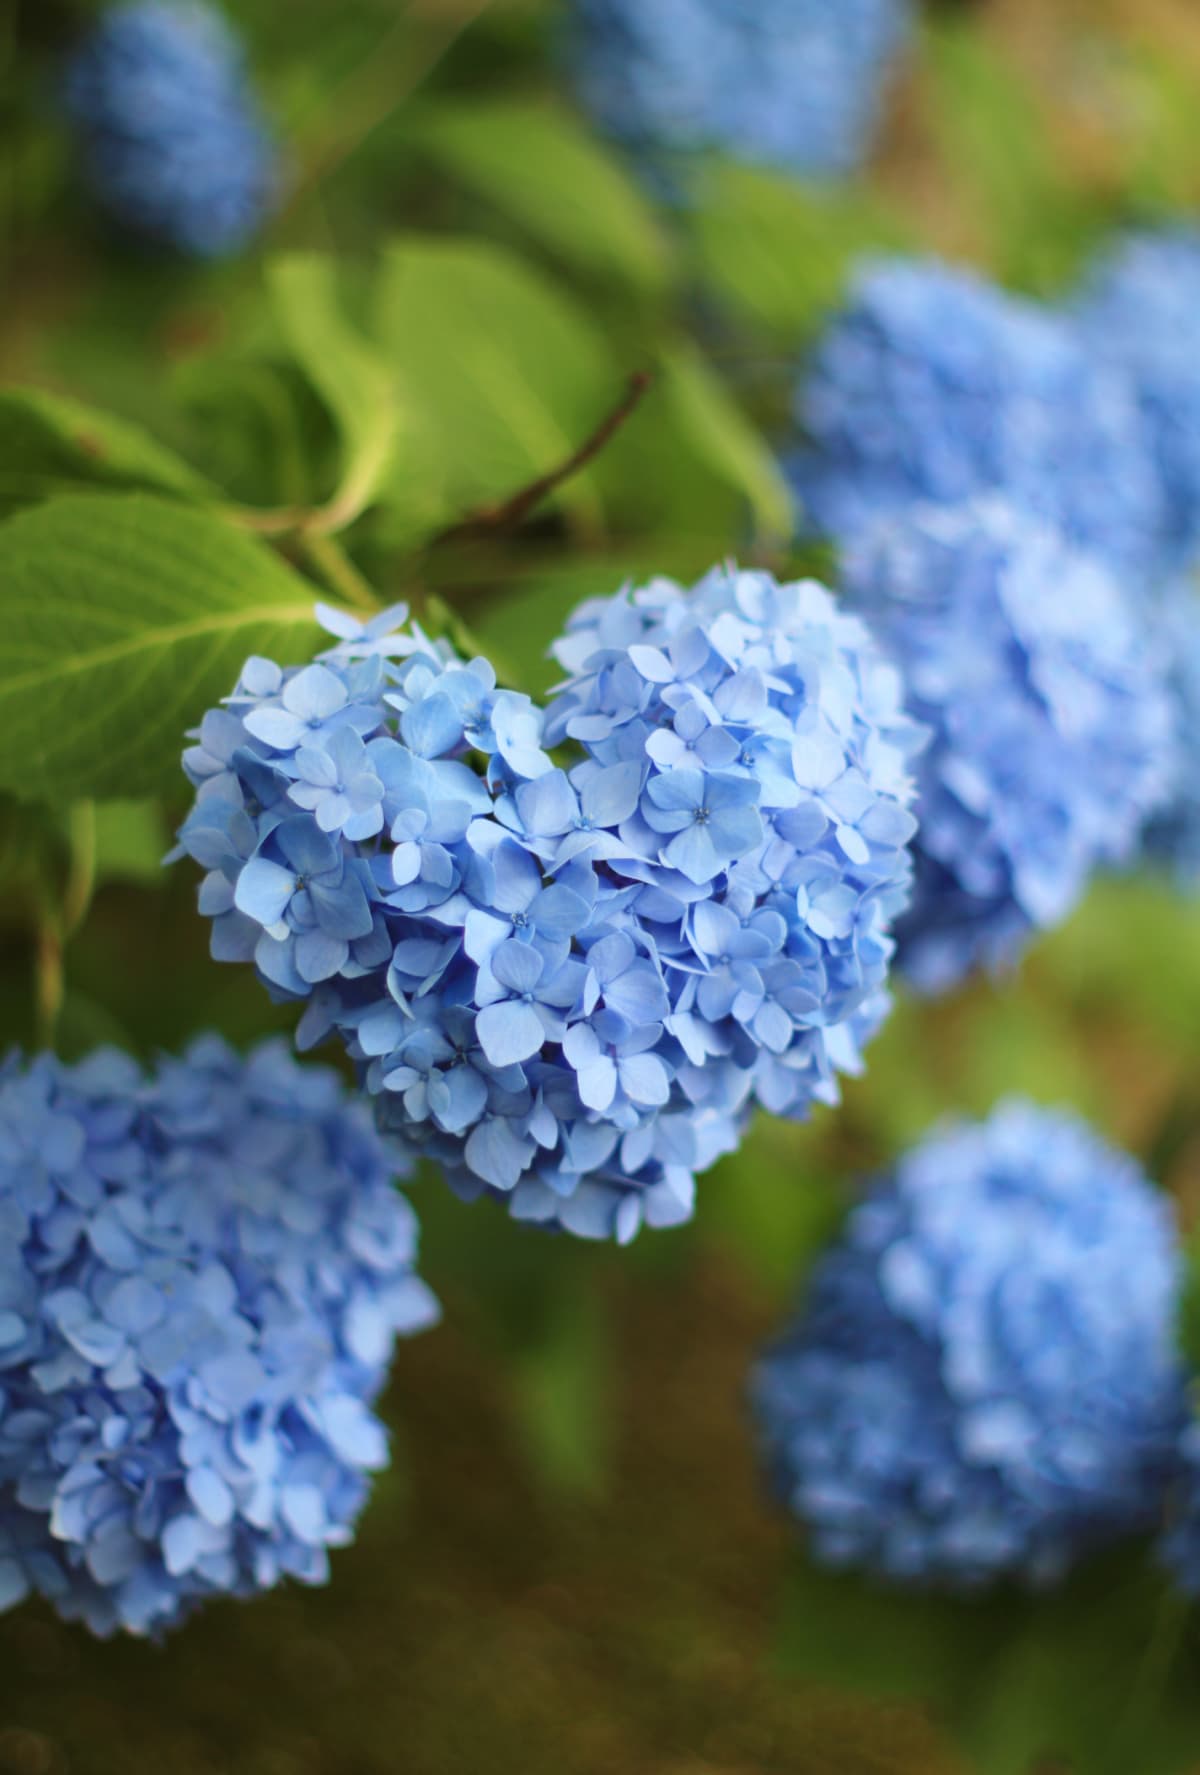 Lovely blue heart shaped Hydrangea in bloom after rain.Recently in Japan ,it is said that finding heart-shaped hydrangeas brings happiness and grants love wishes.